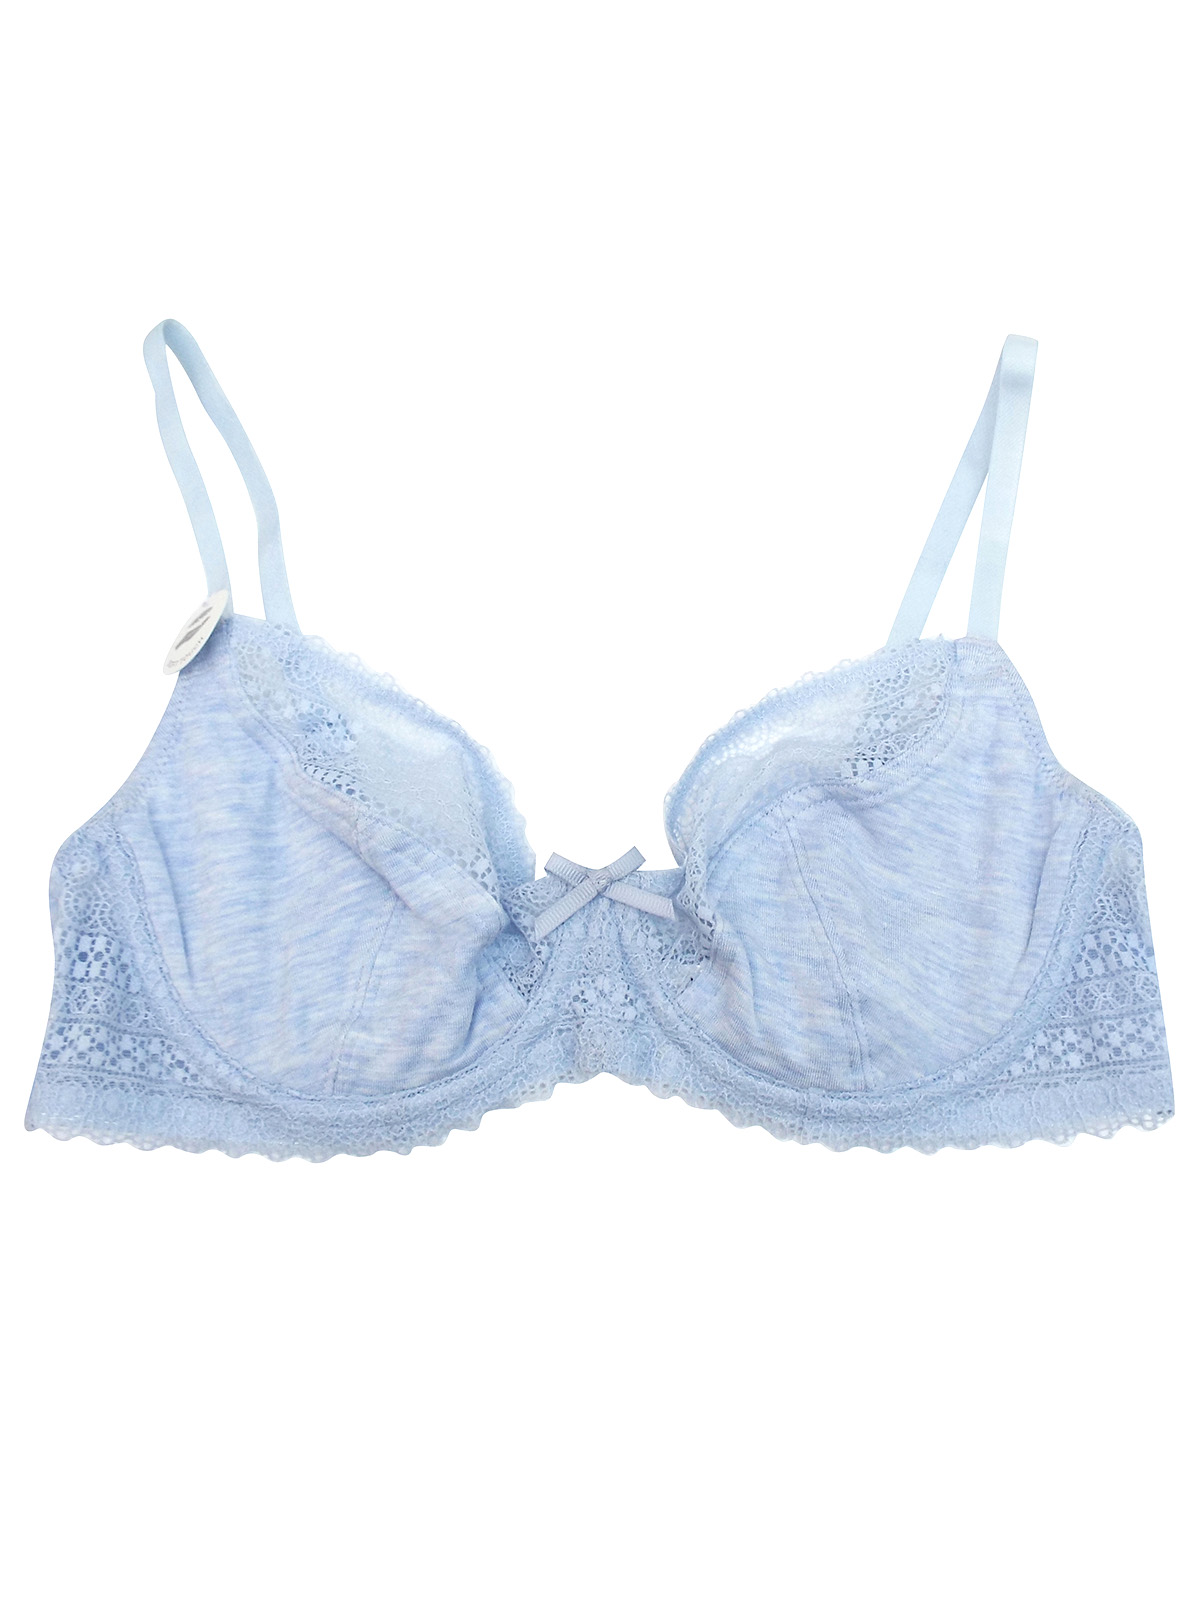 F&F - - F&F BLUE Floral Lace Wired Full Cup Bra - Size 32 to 38 (B-C-D-DD)